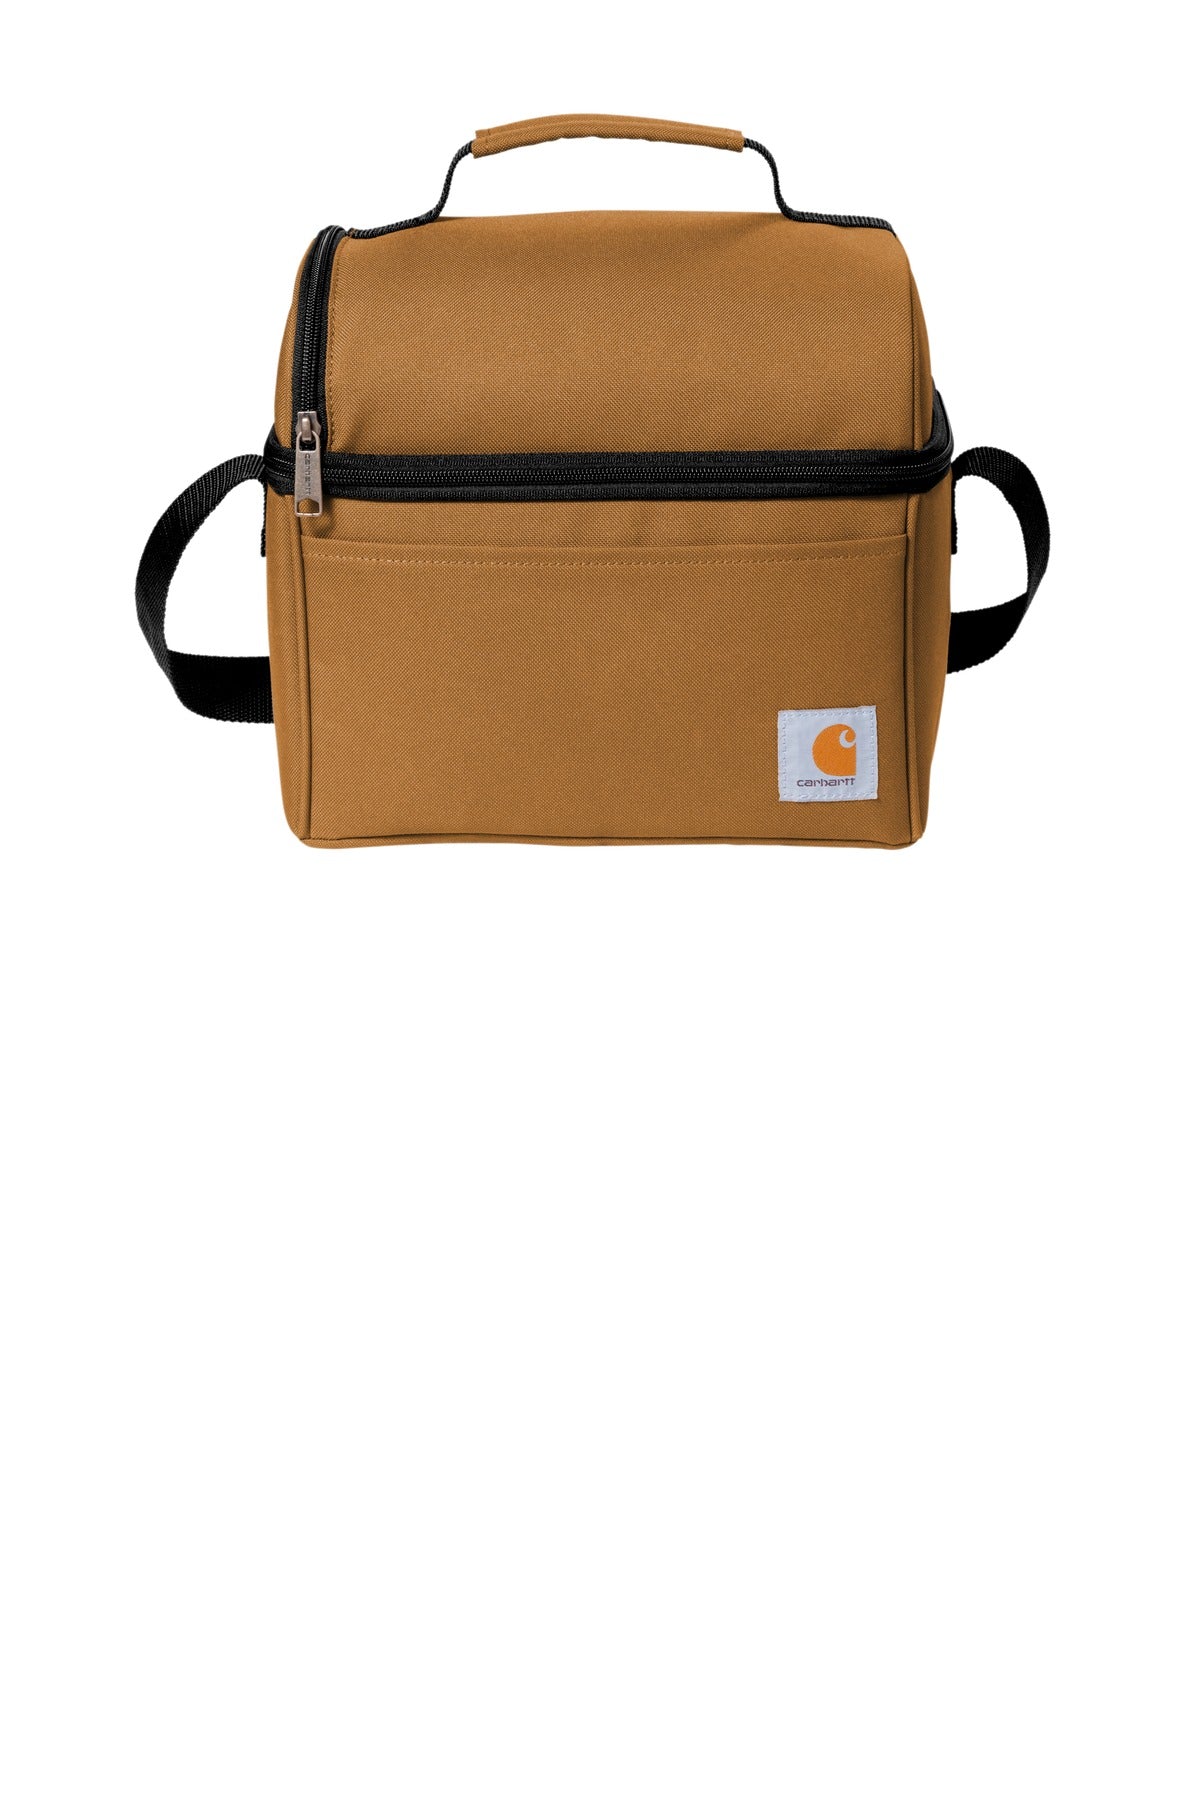 Carhartt®  Lunch 6-Can Cooler. CT89251601